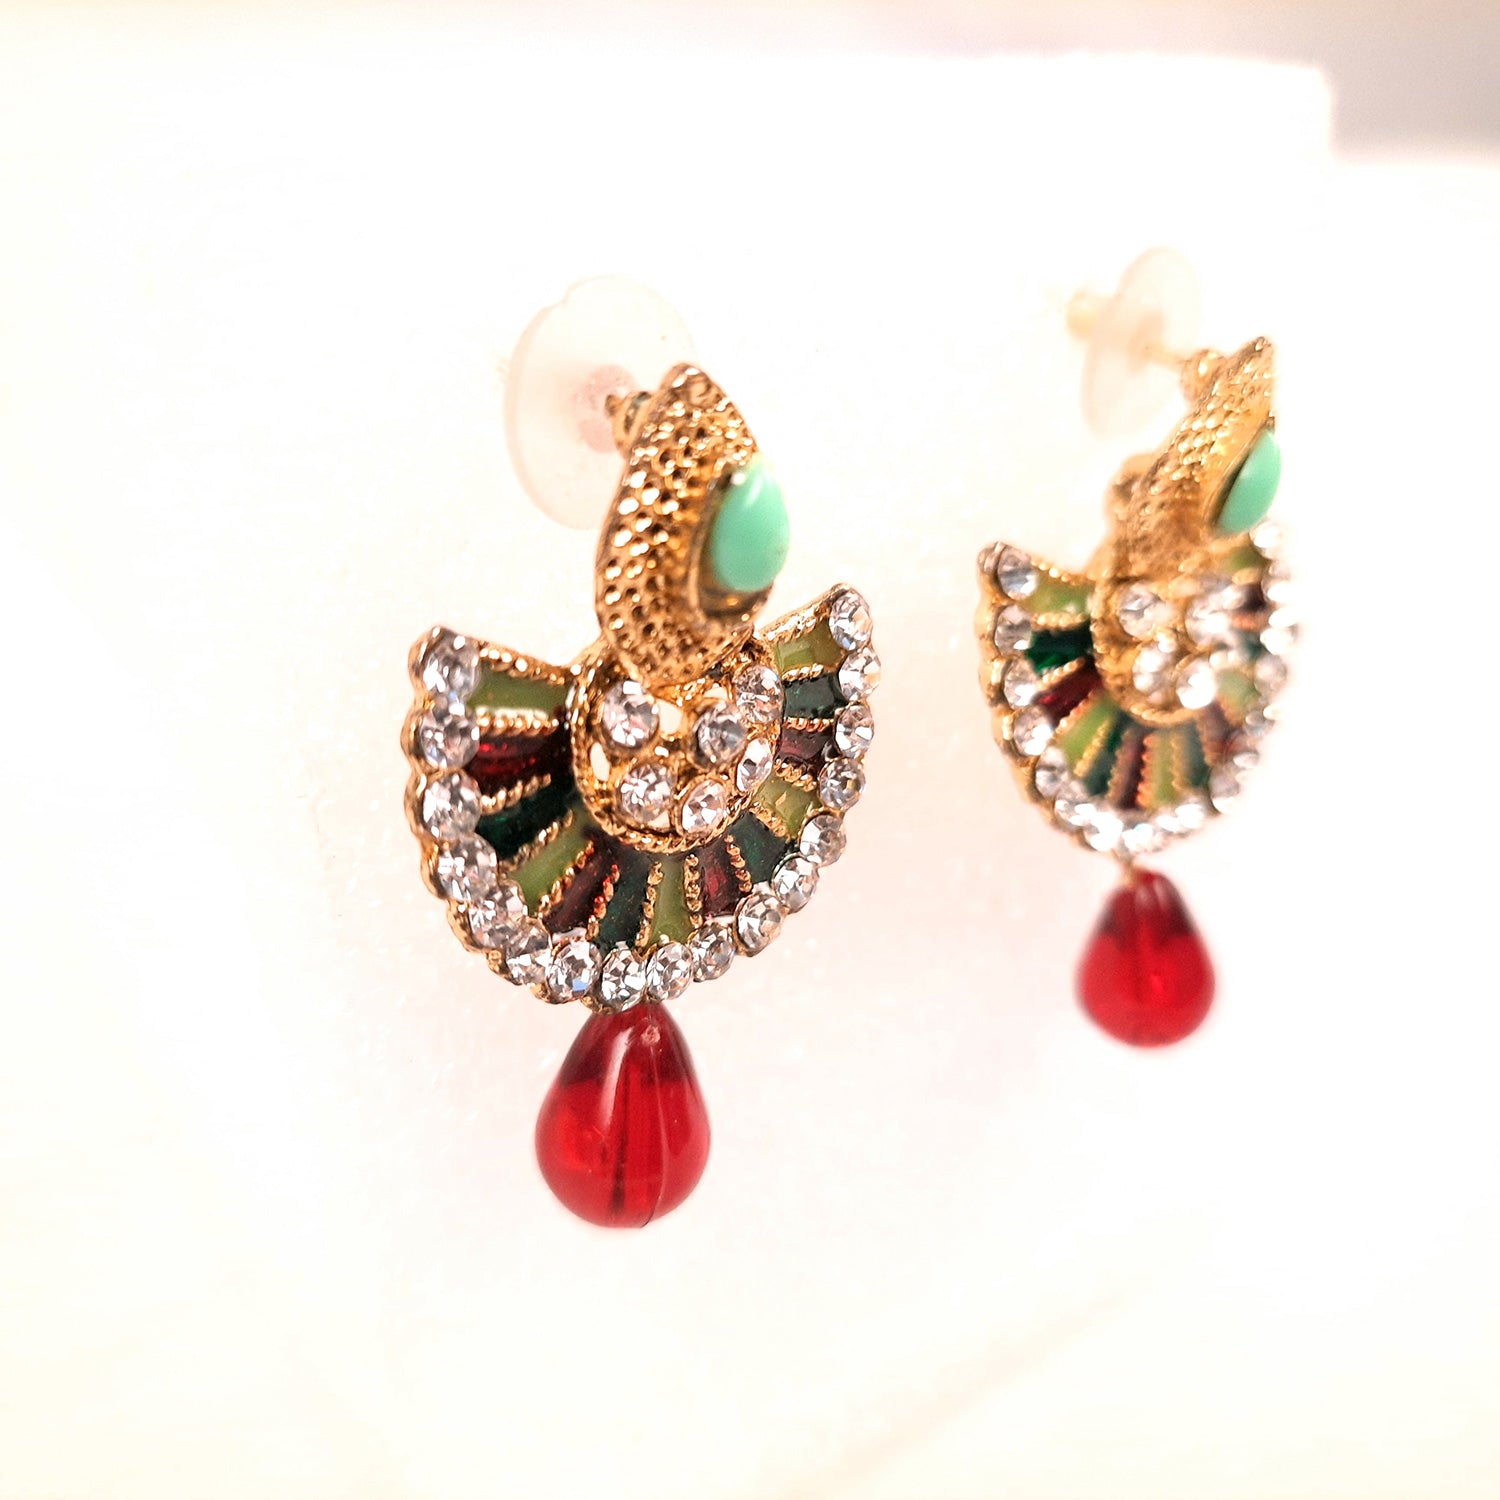 Earring Stud - Multicolour Floral Drop Earrings - for Girls and Women | Latest Stylish Fashion Jewellery | Gifts for Her, Friendship Day, Valentine's Day Gift - apkamart